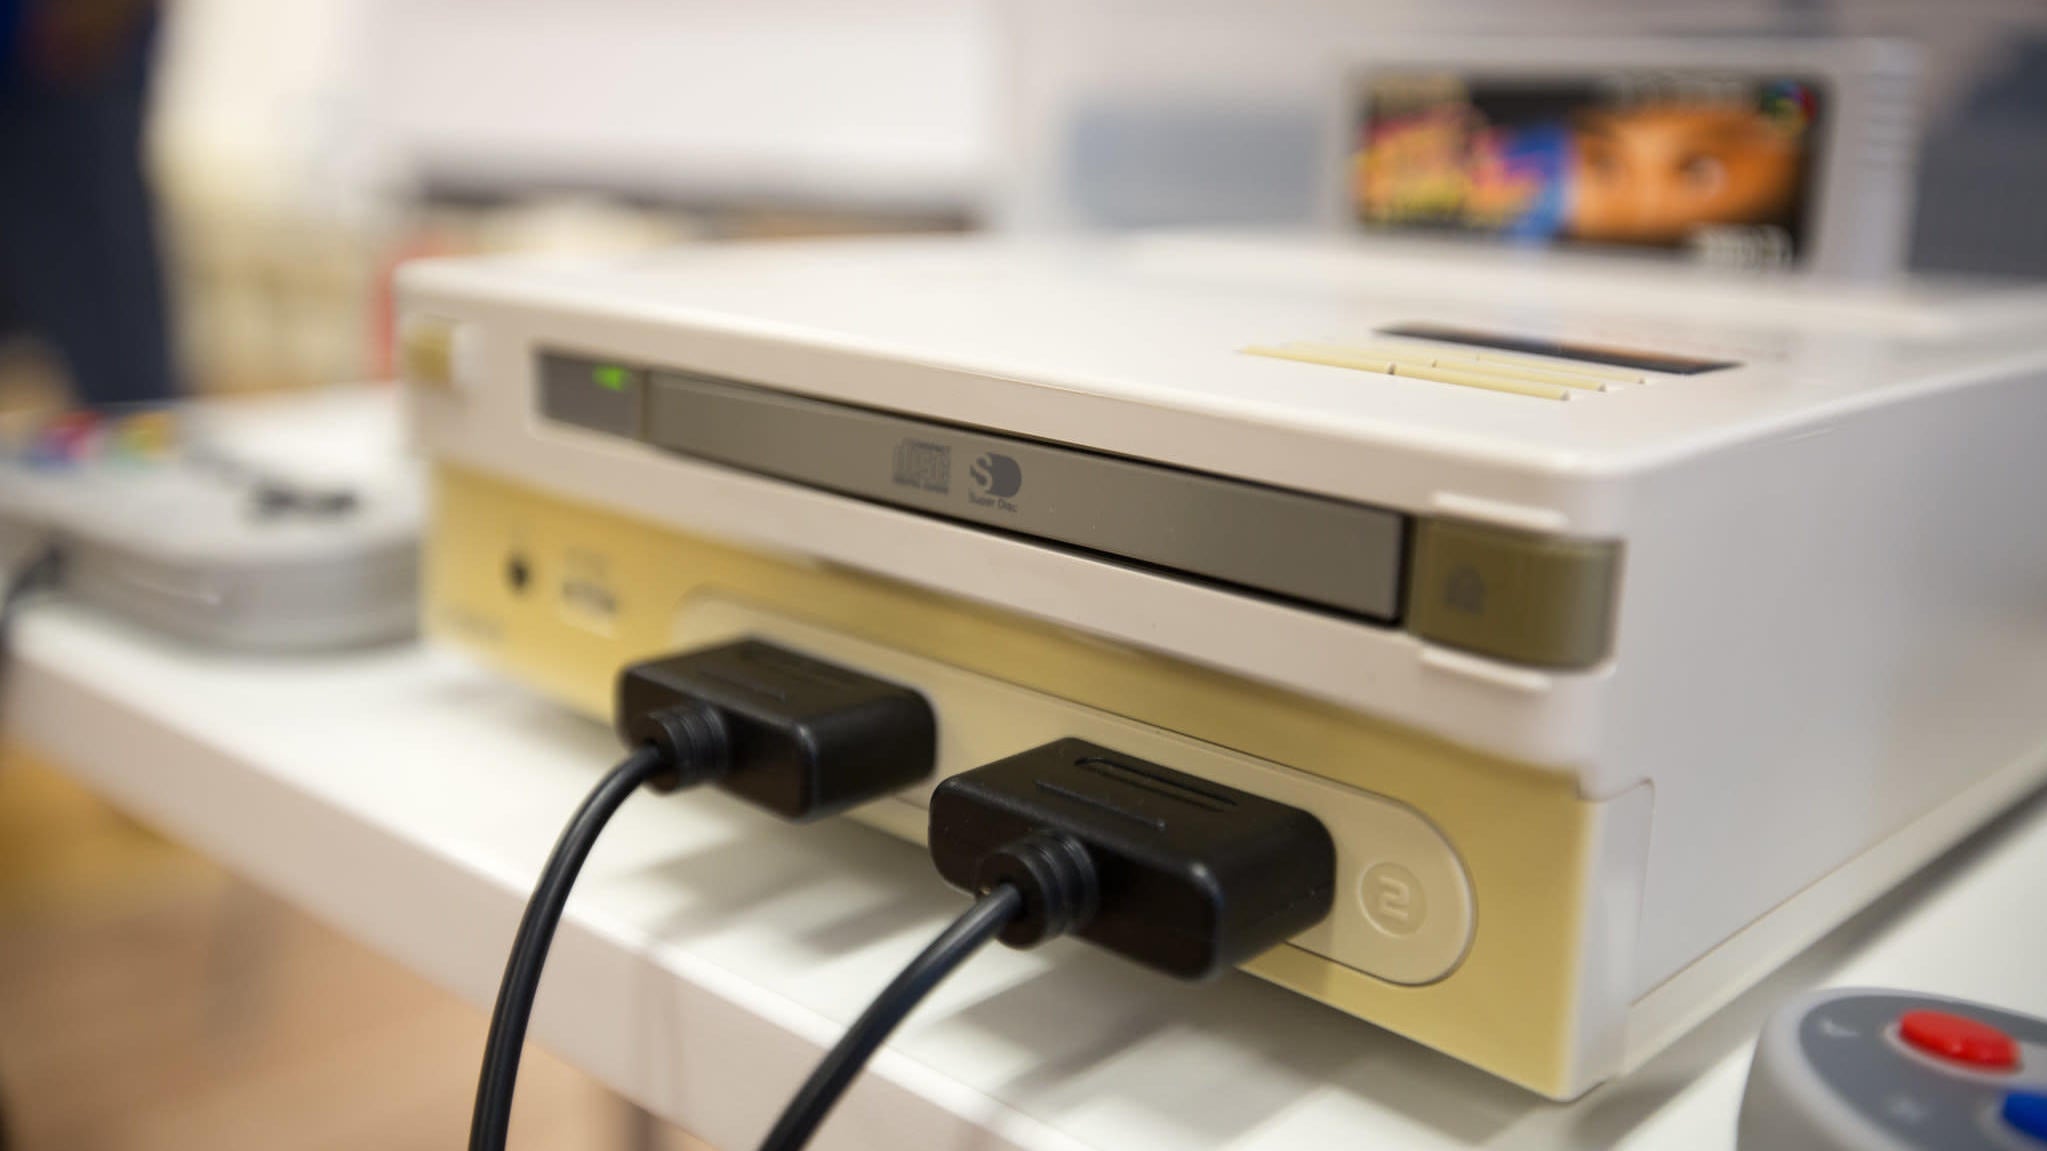 ‘Nintendo Play Station’ Prototype Will Be Auctioned Off In February